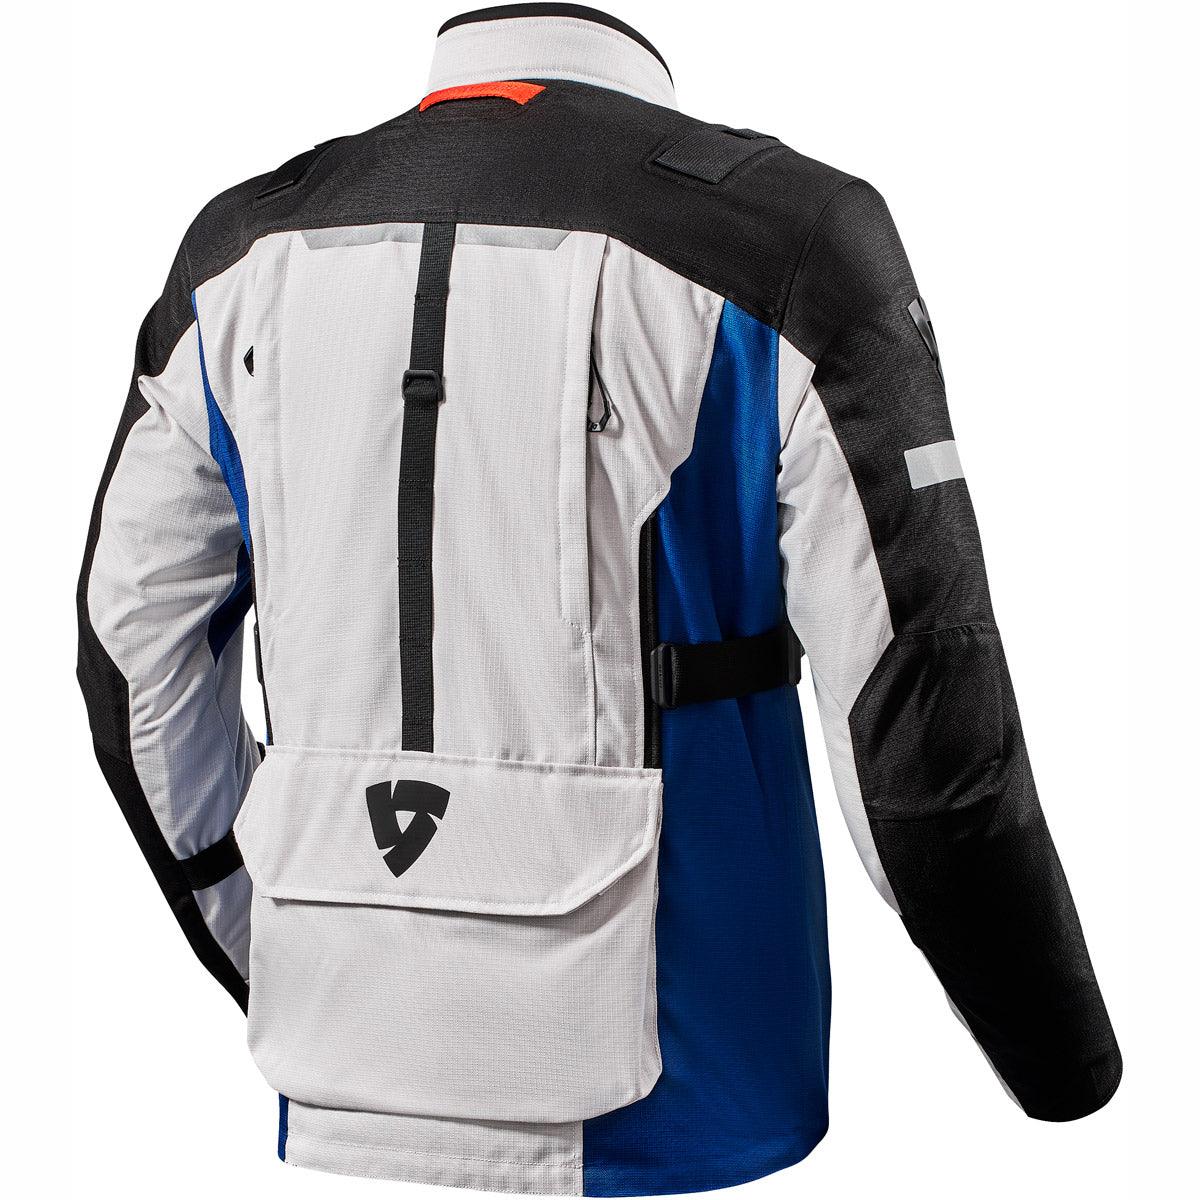 Rev It Sand 4 Jacket 3L H2O WP Silver Blue - Motorcycle Clothing